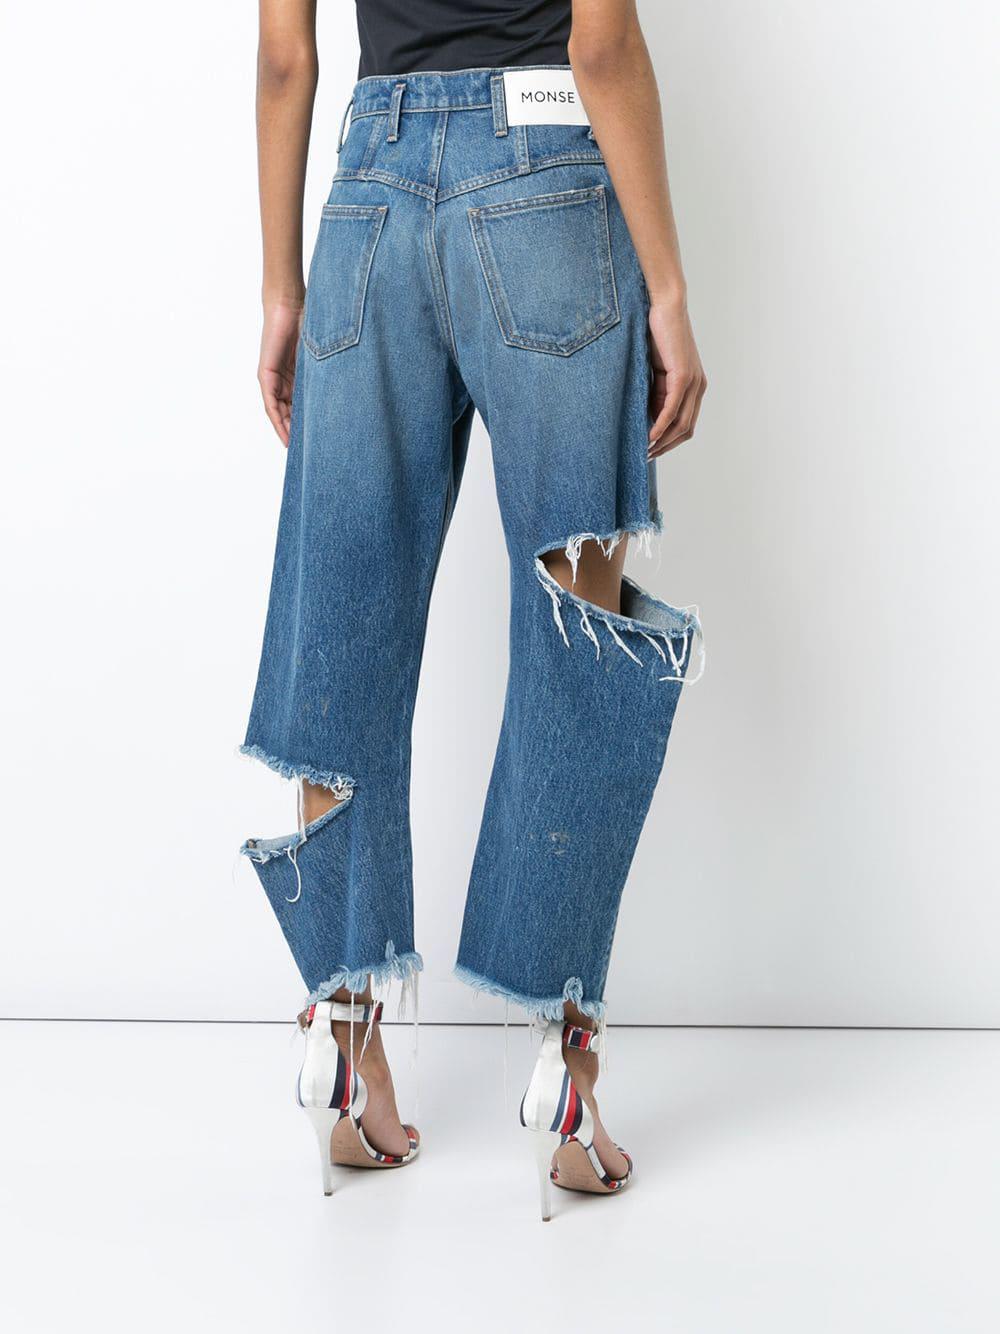 Monse Denim Distressed Cropped Jeans in Blue - Lyst